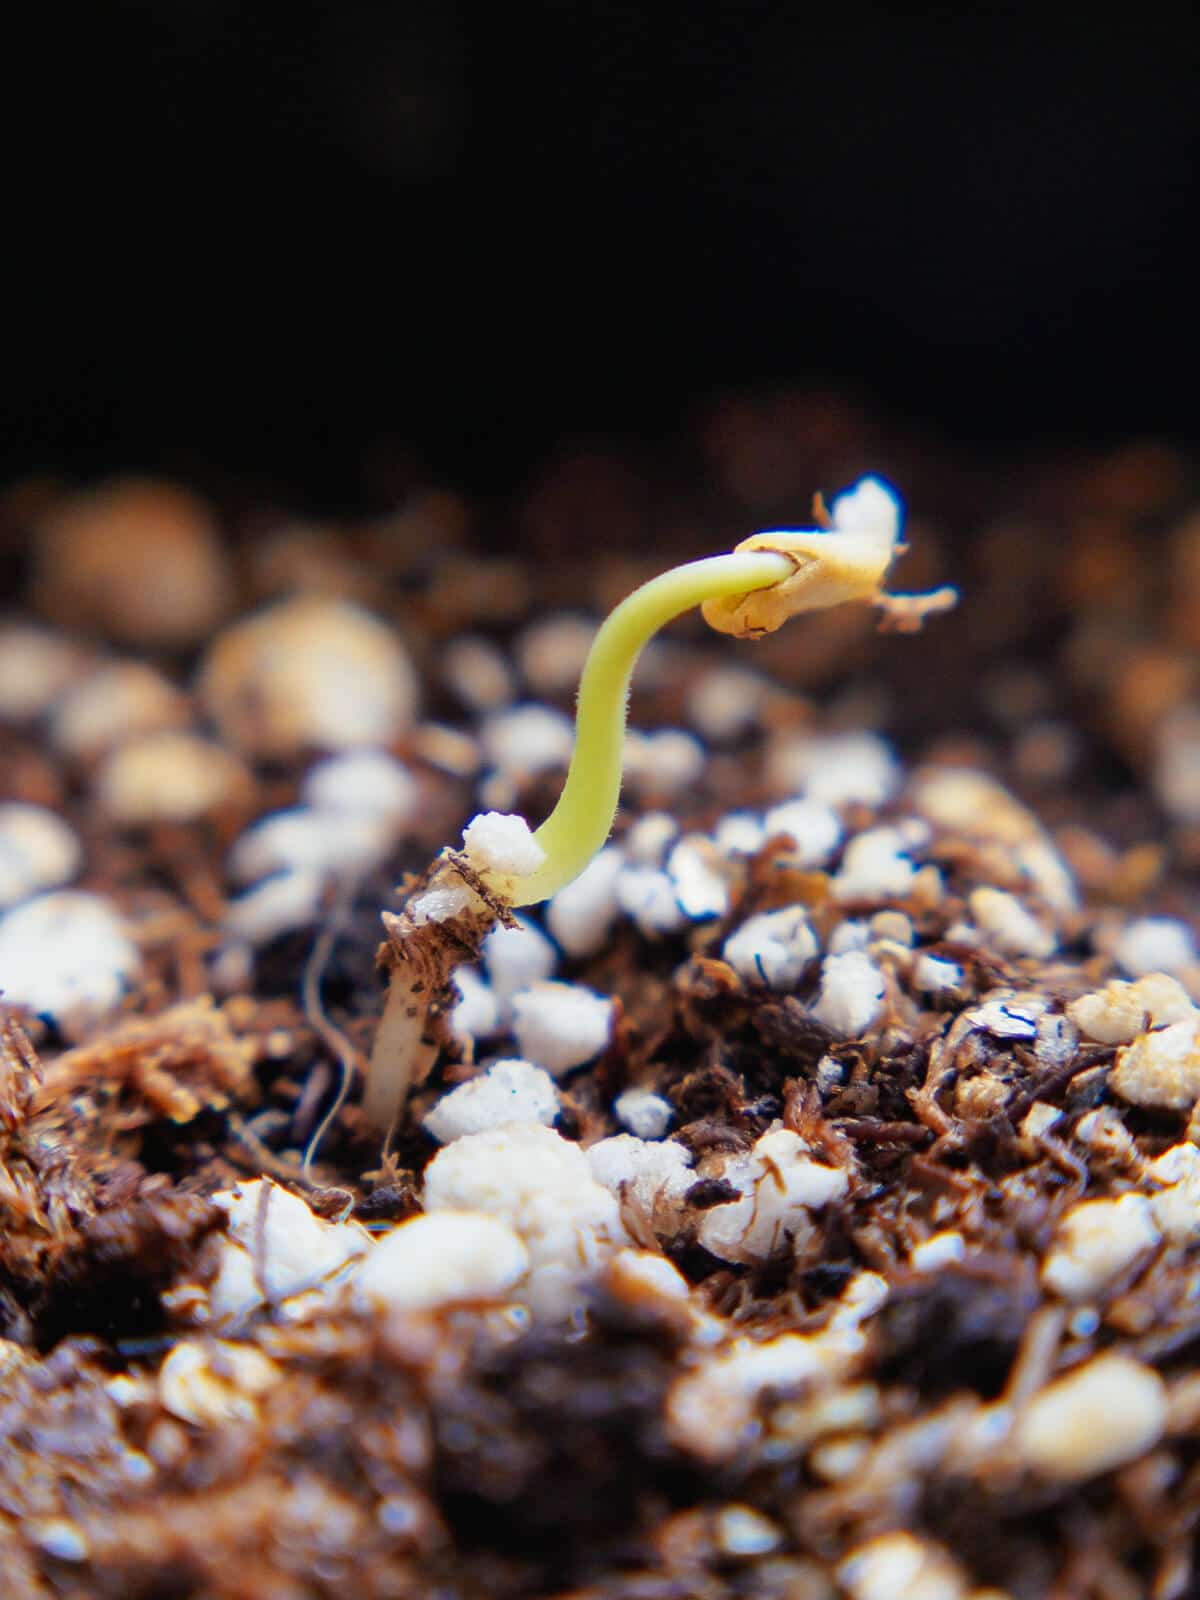 Radicle anchoring seedling to the soil while hypocotyl rises above the surface